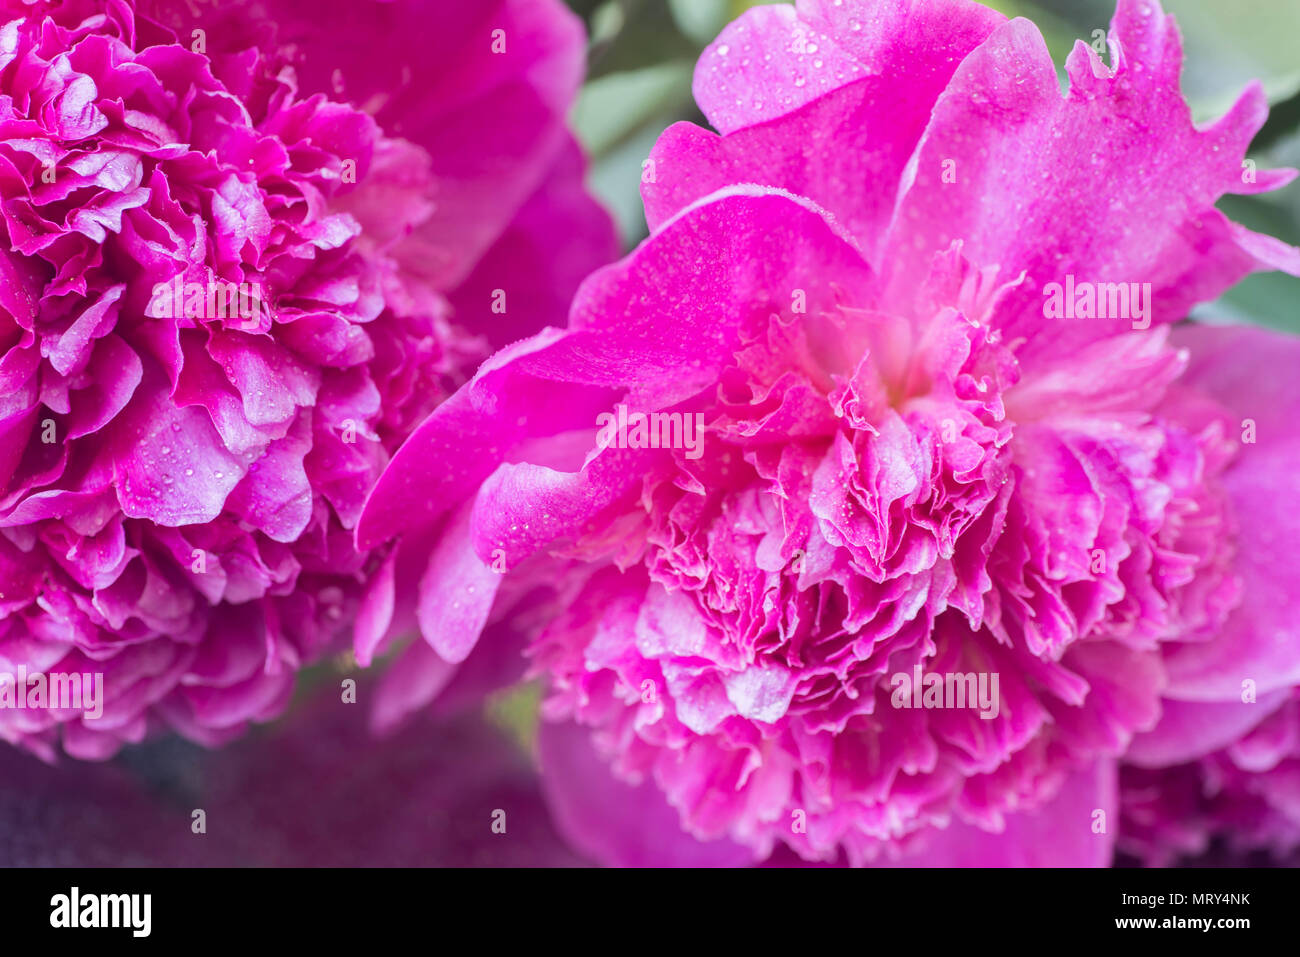 pink peony flower petals macro with water drops selective focus Stock Photo